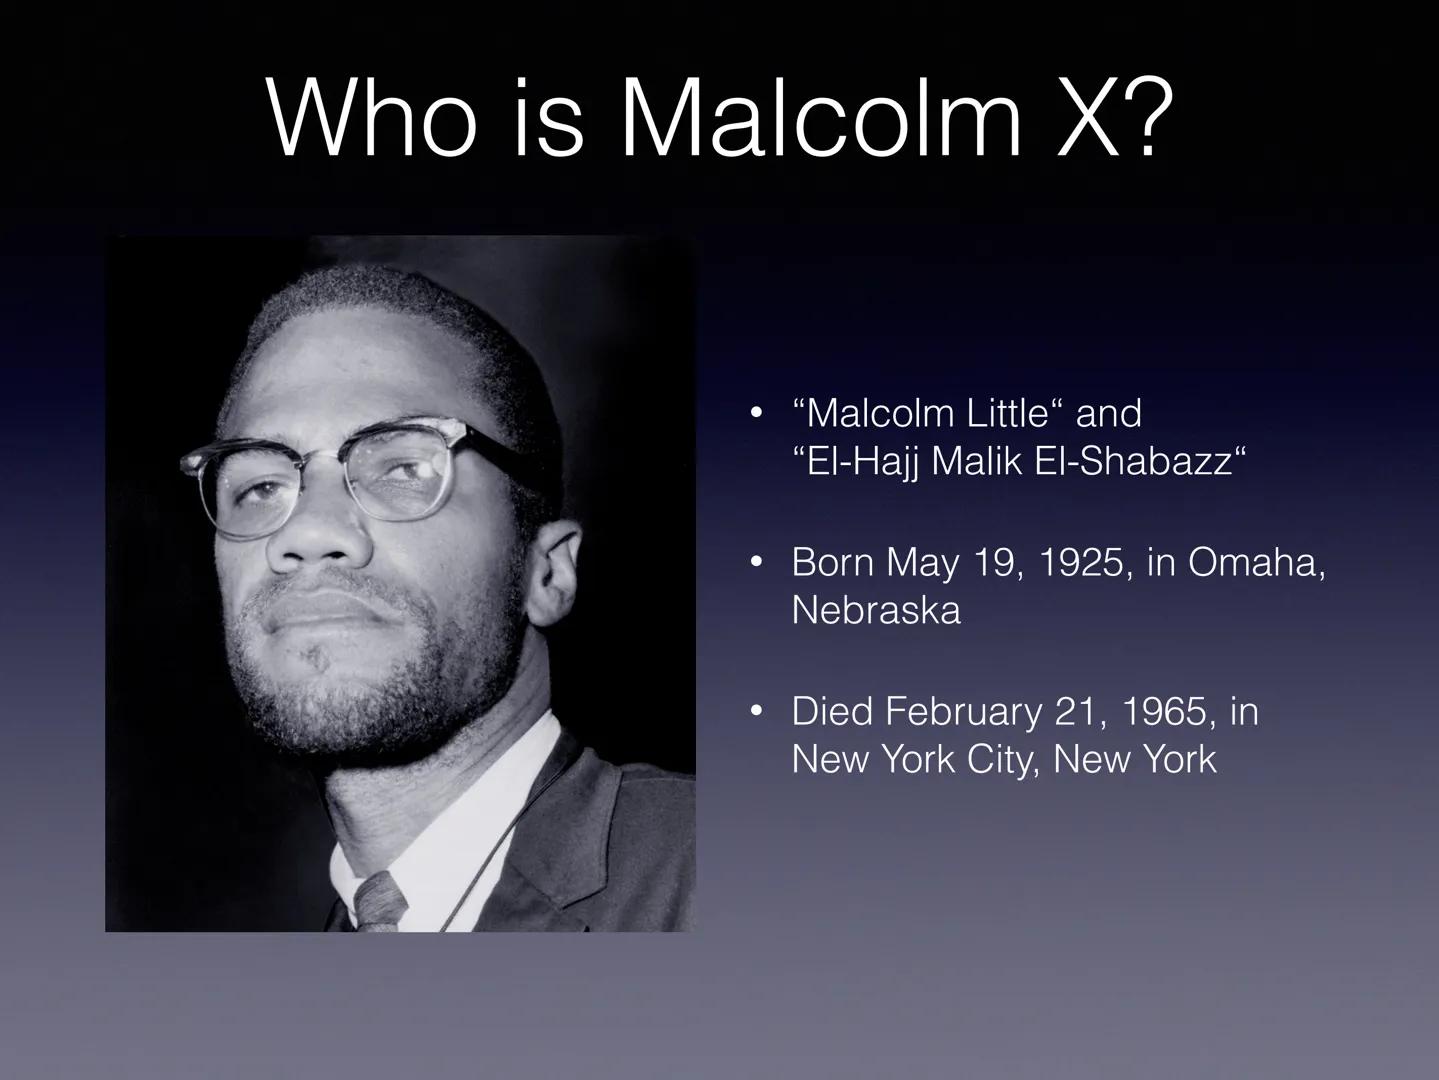 Malcolm X • Who is Malcolm X?
●
●
●
●
●
●
table of contents
●
Family
Early years
Death threats
Assassination
Philosophy
Malcolm X:"Message t